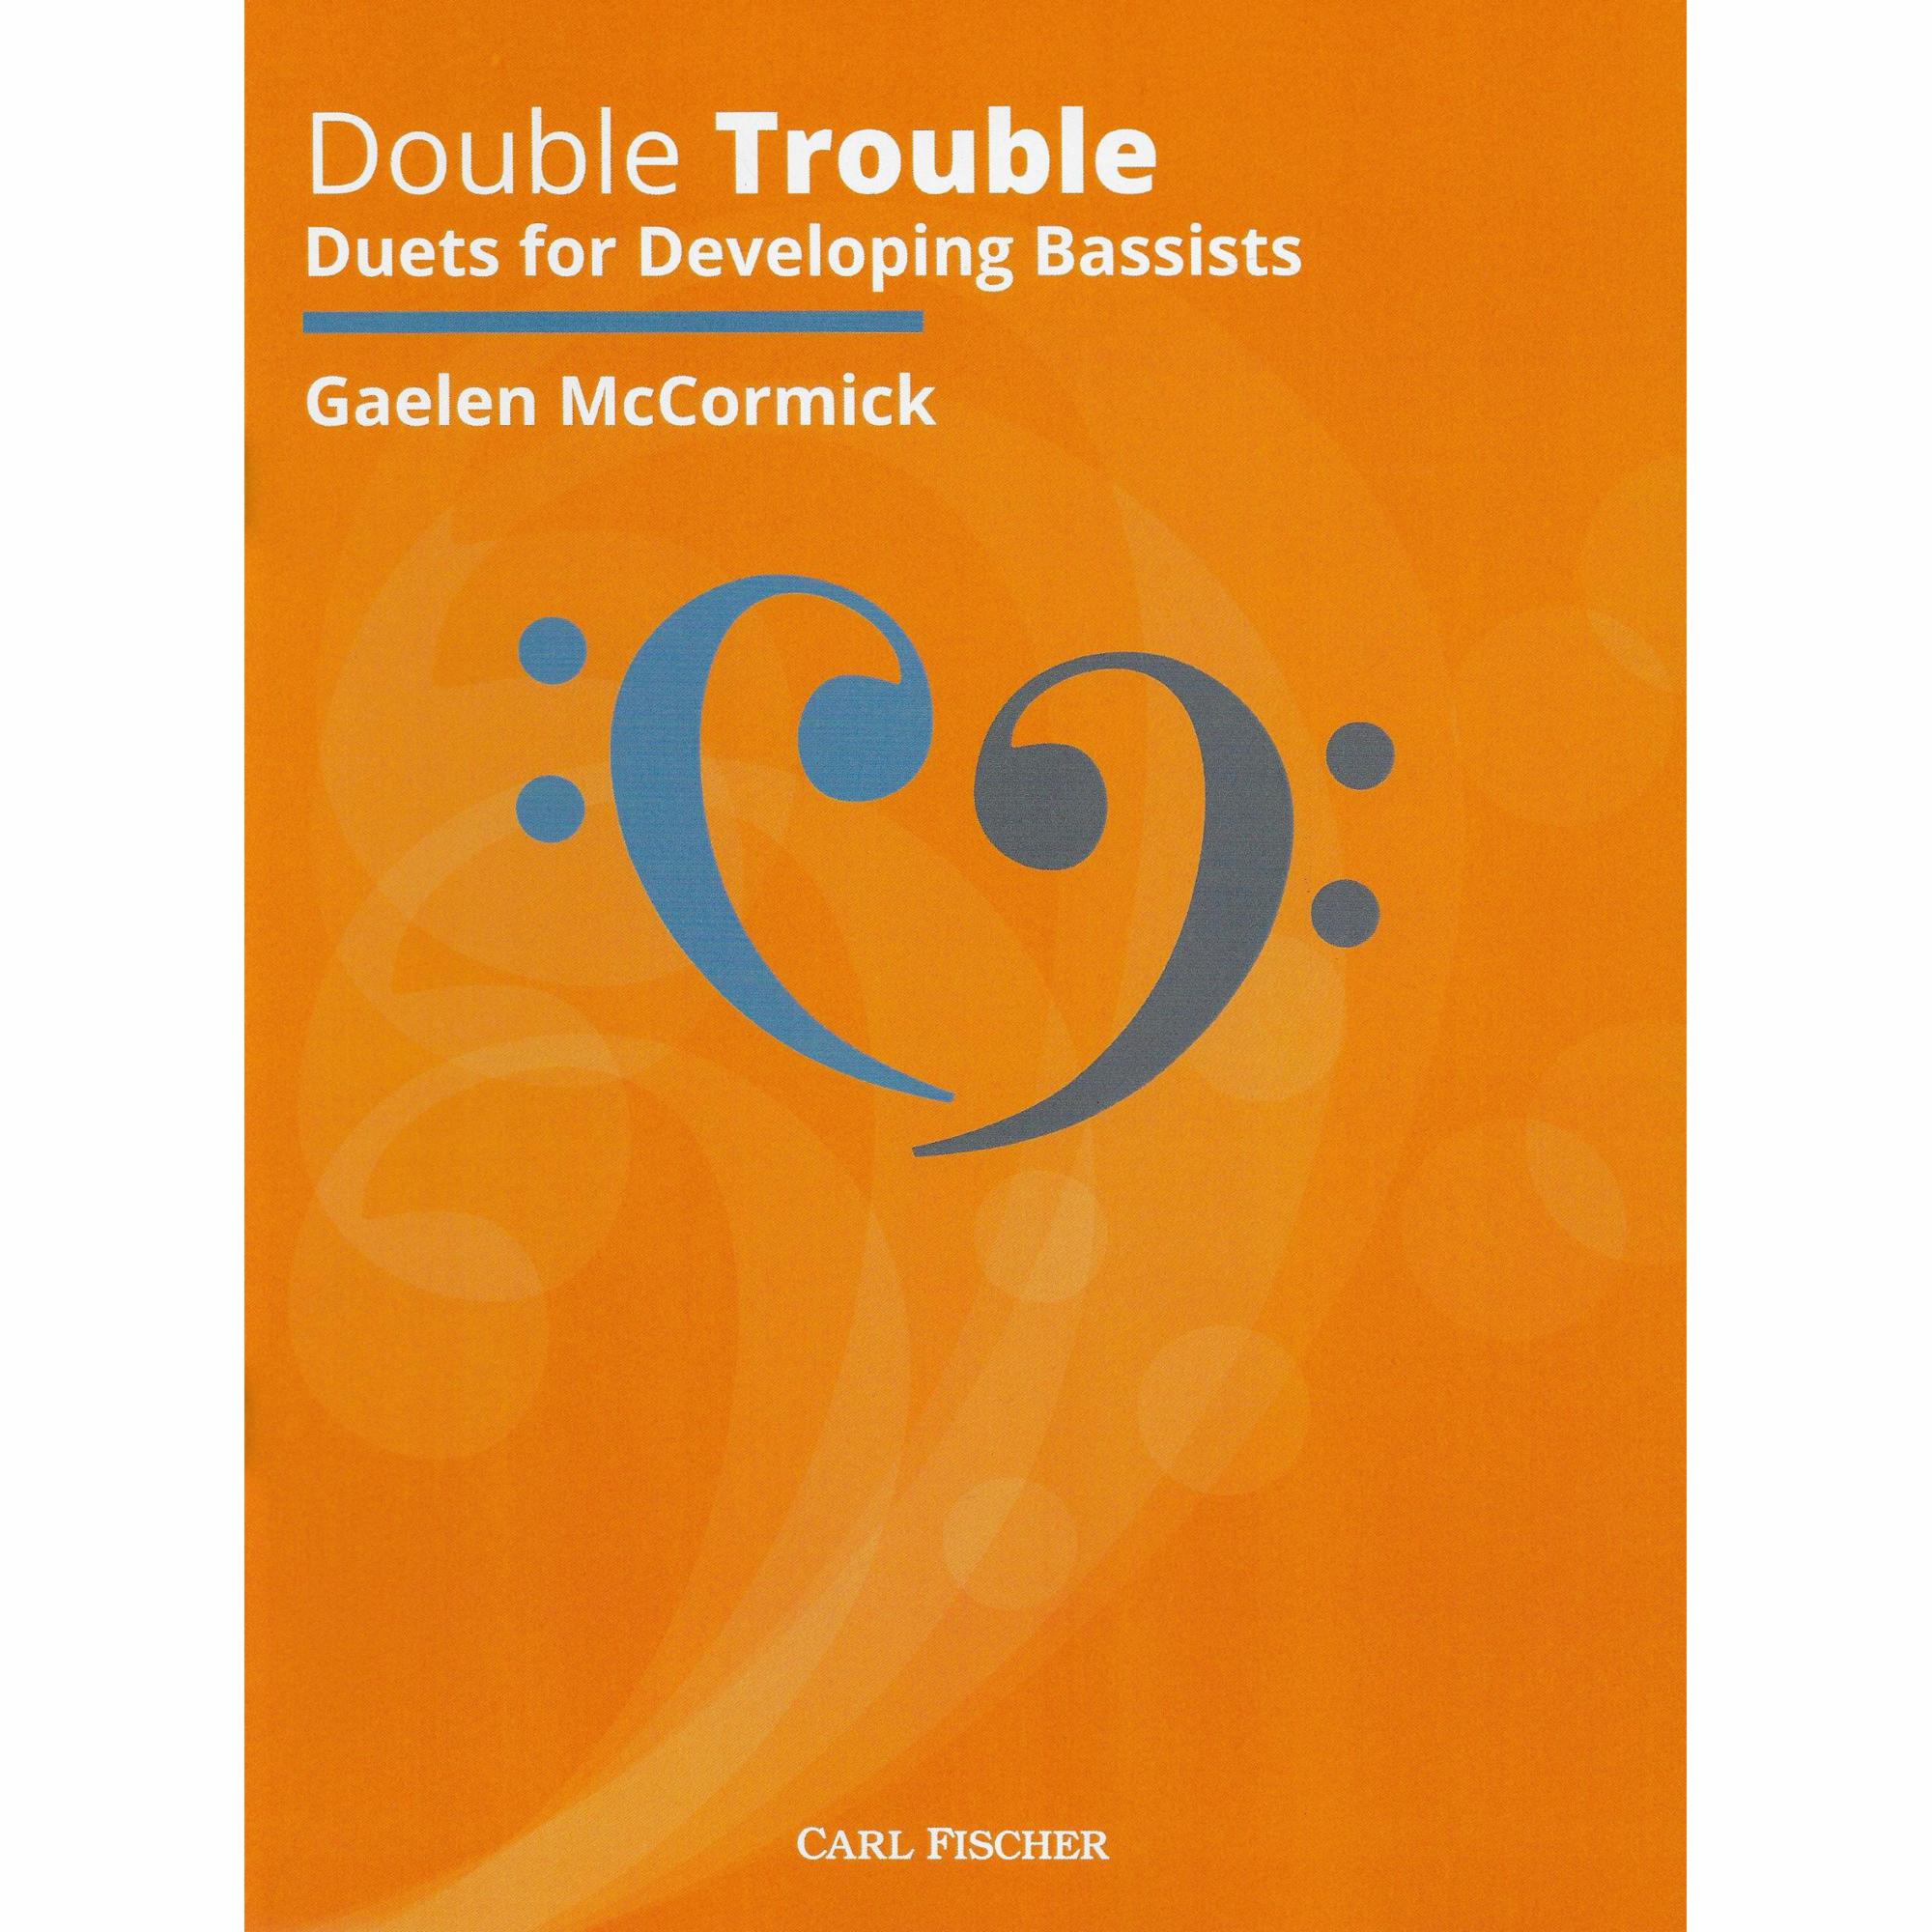 Double Trouble: Duets for Developing Bassists